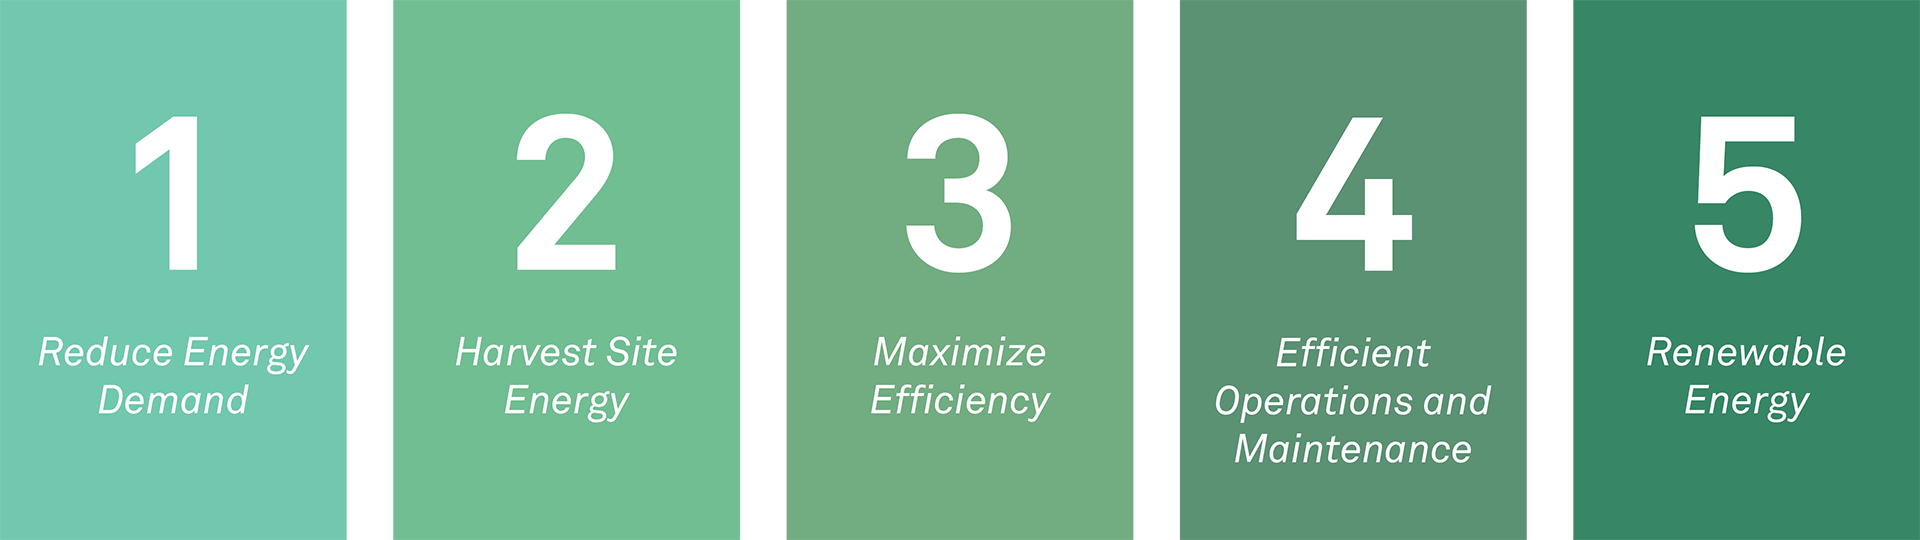 graphic of 5 steps for net zero usage